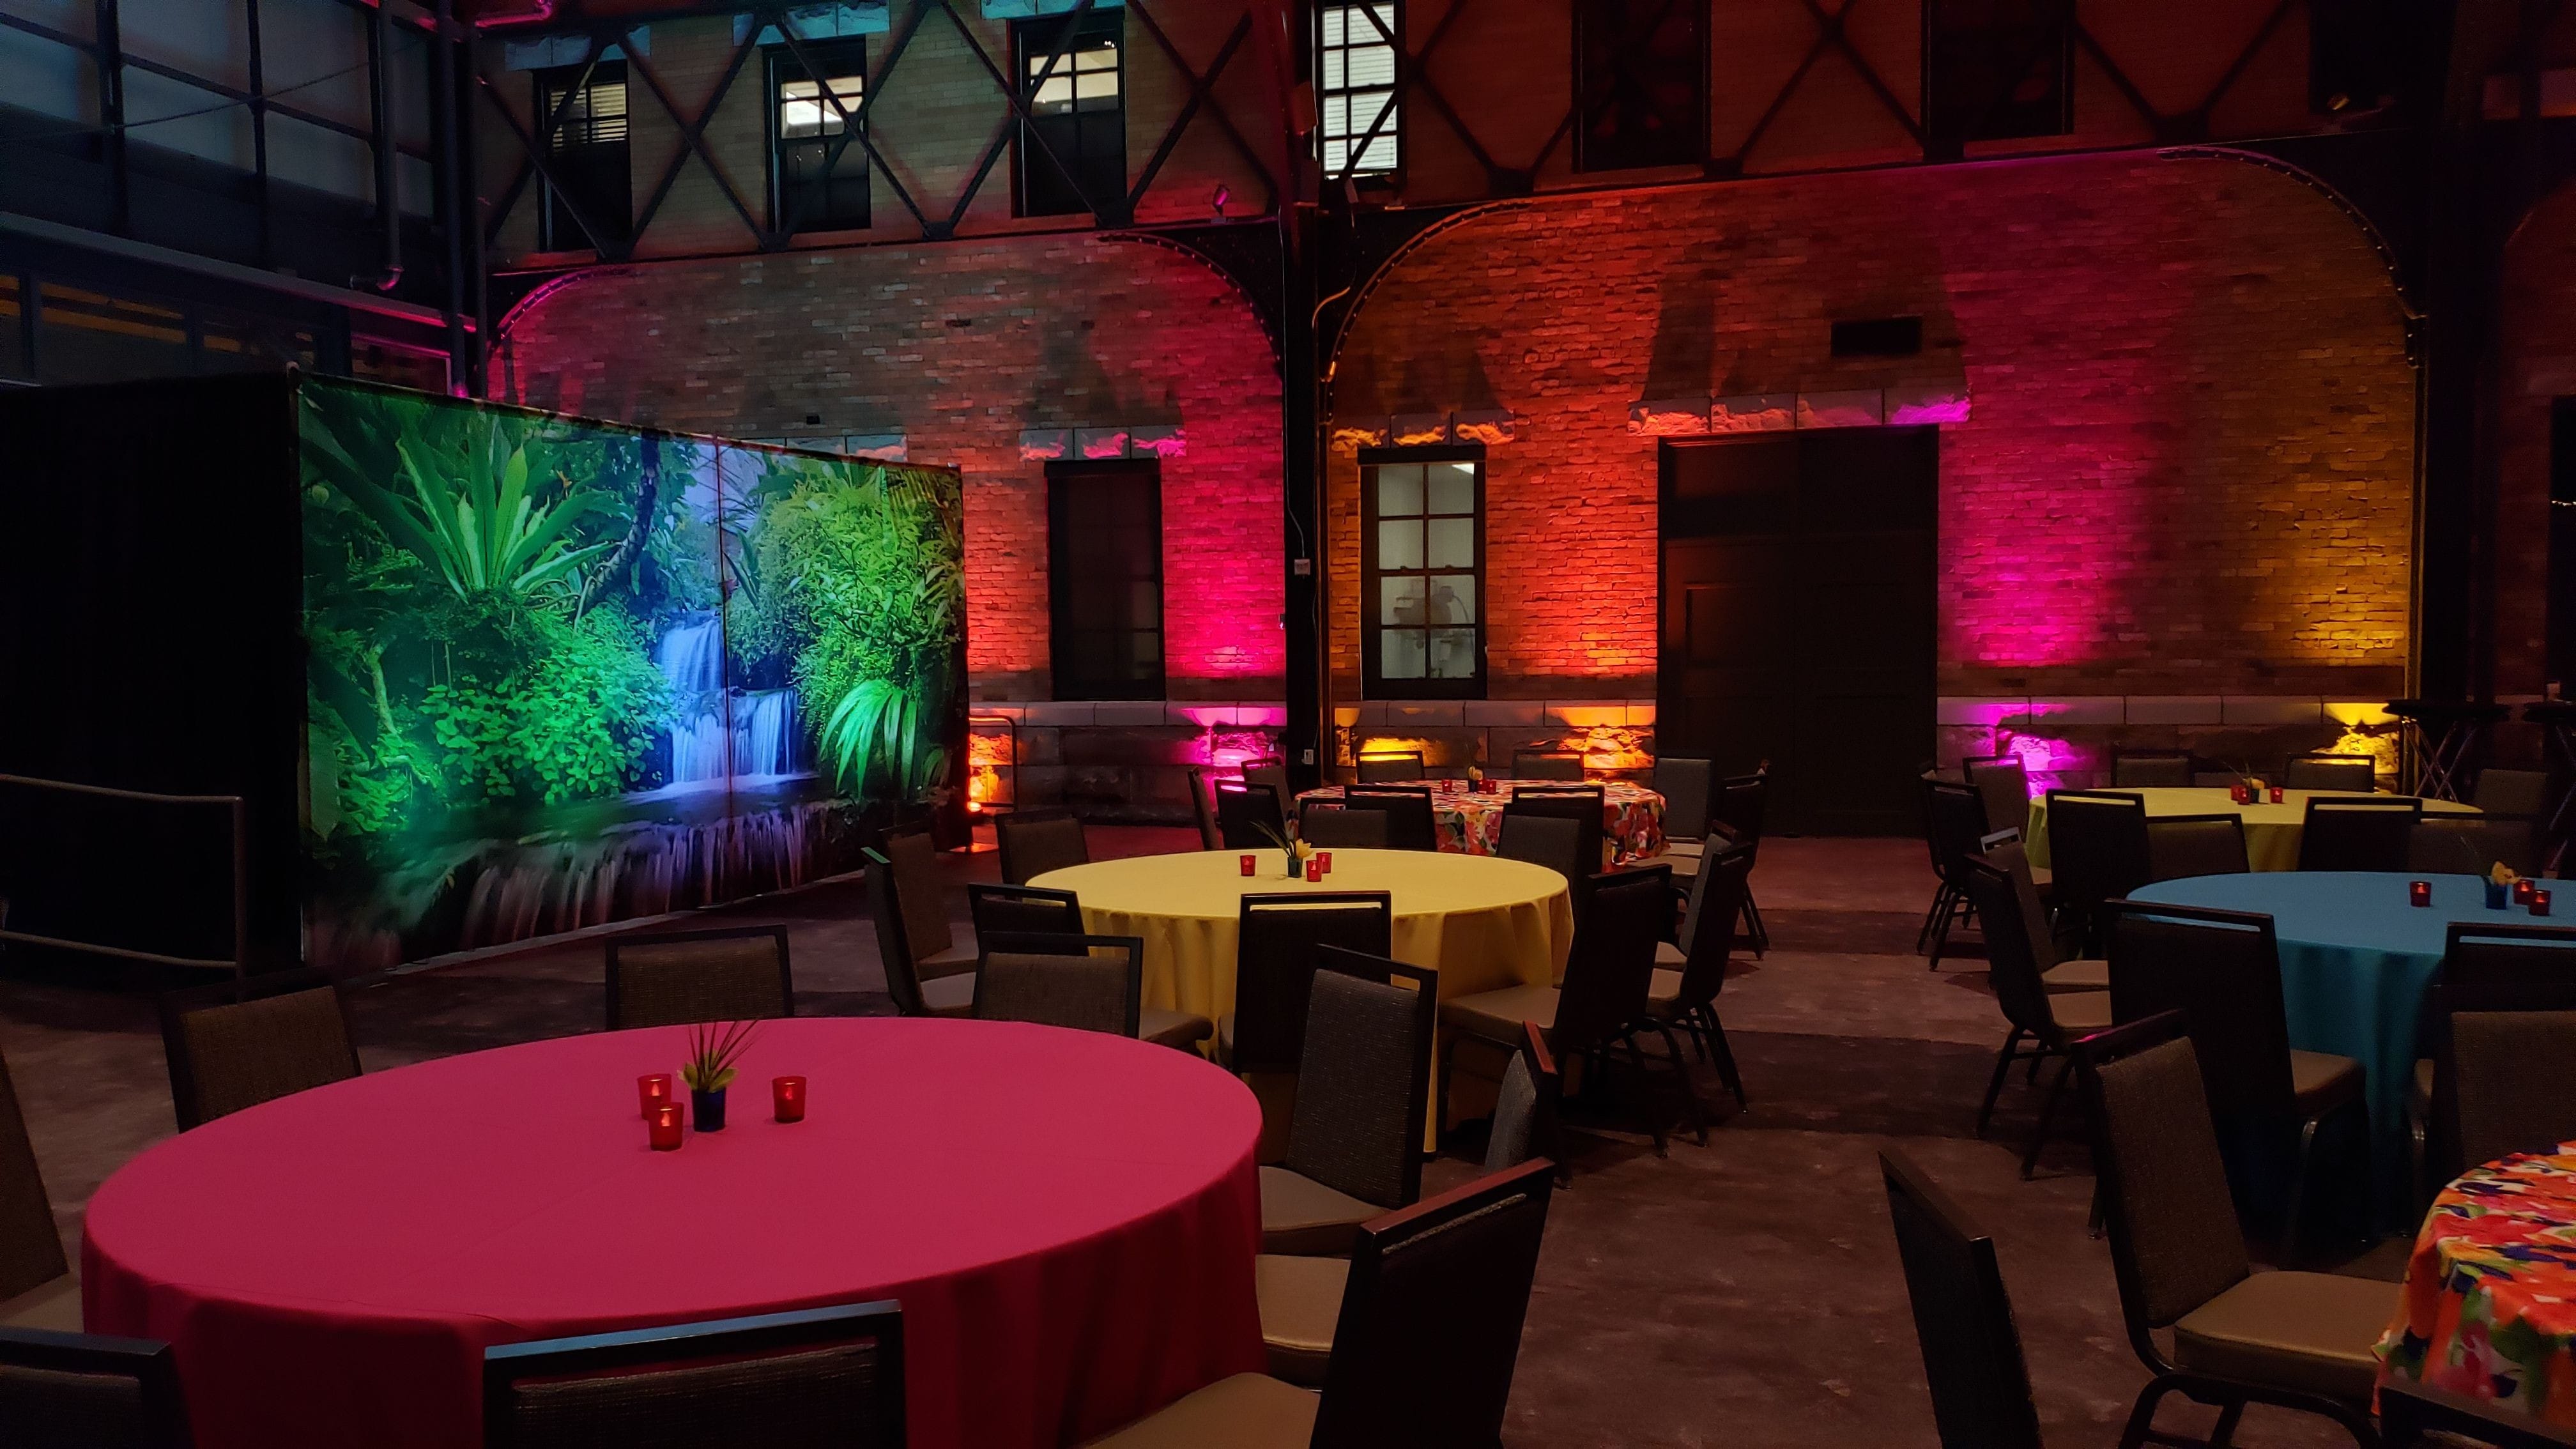 Renaissance Minneapolis, The Depot. Up lighting in warm tones with palm tree gobos, backdrop lighting. Decor by Event Lab